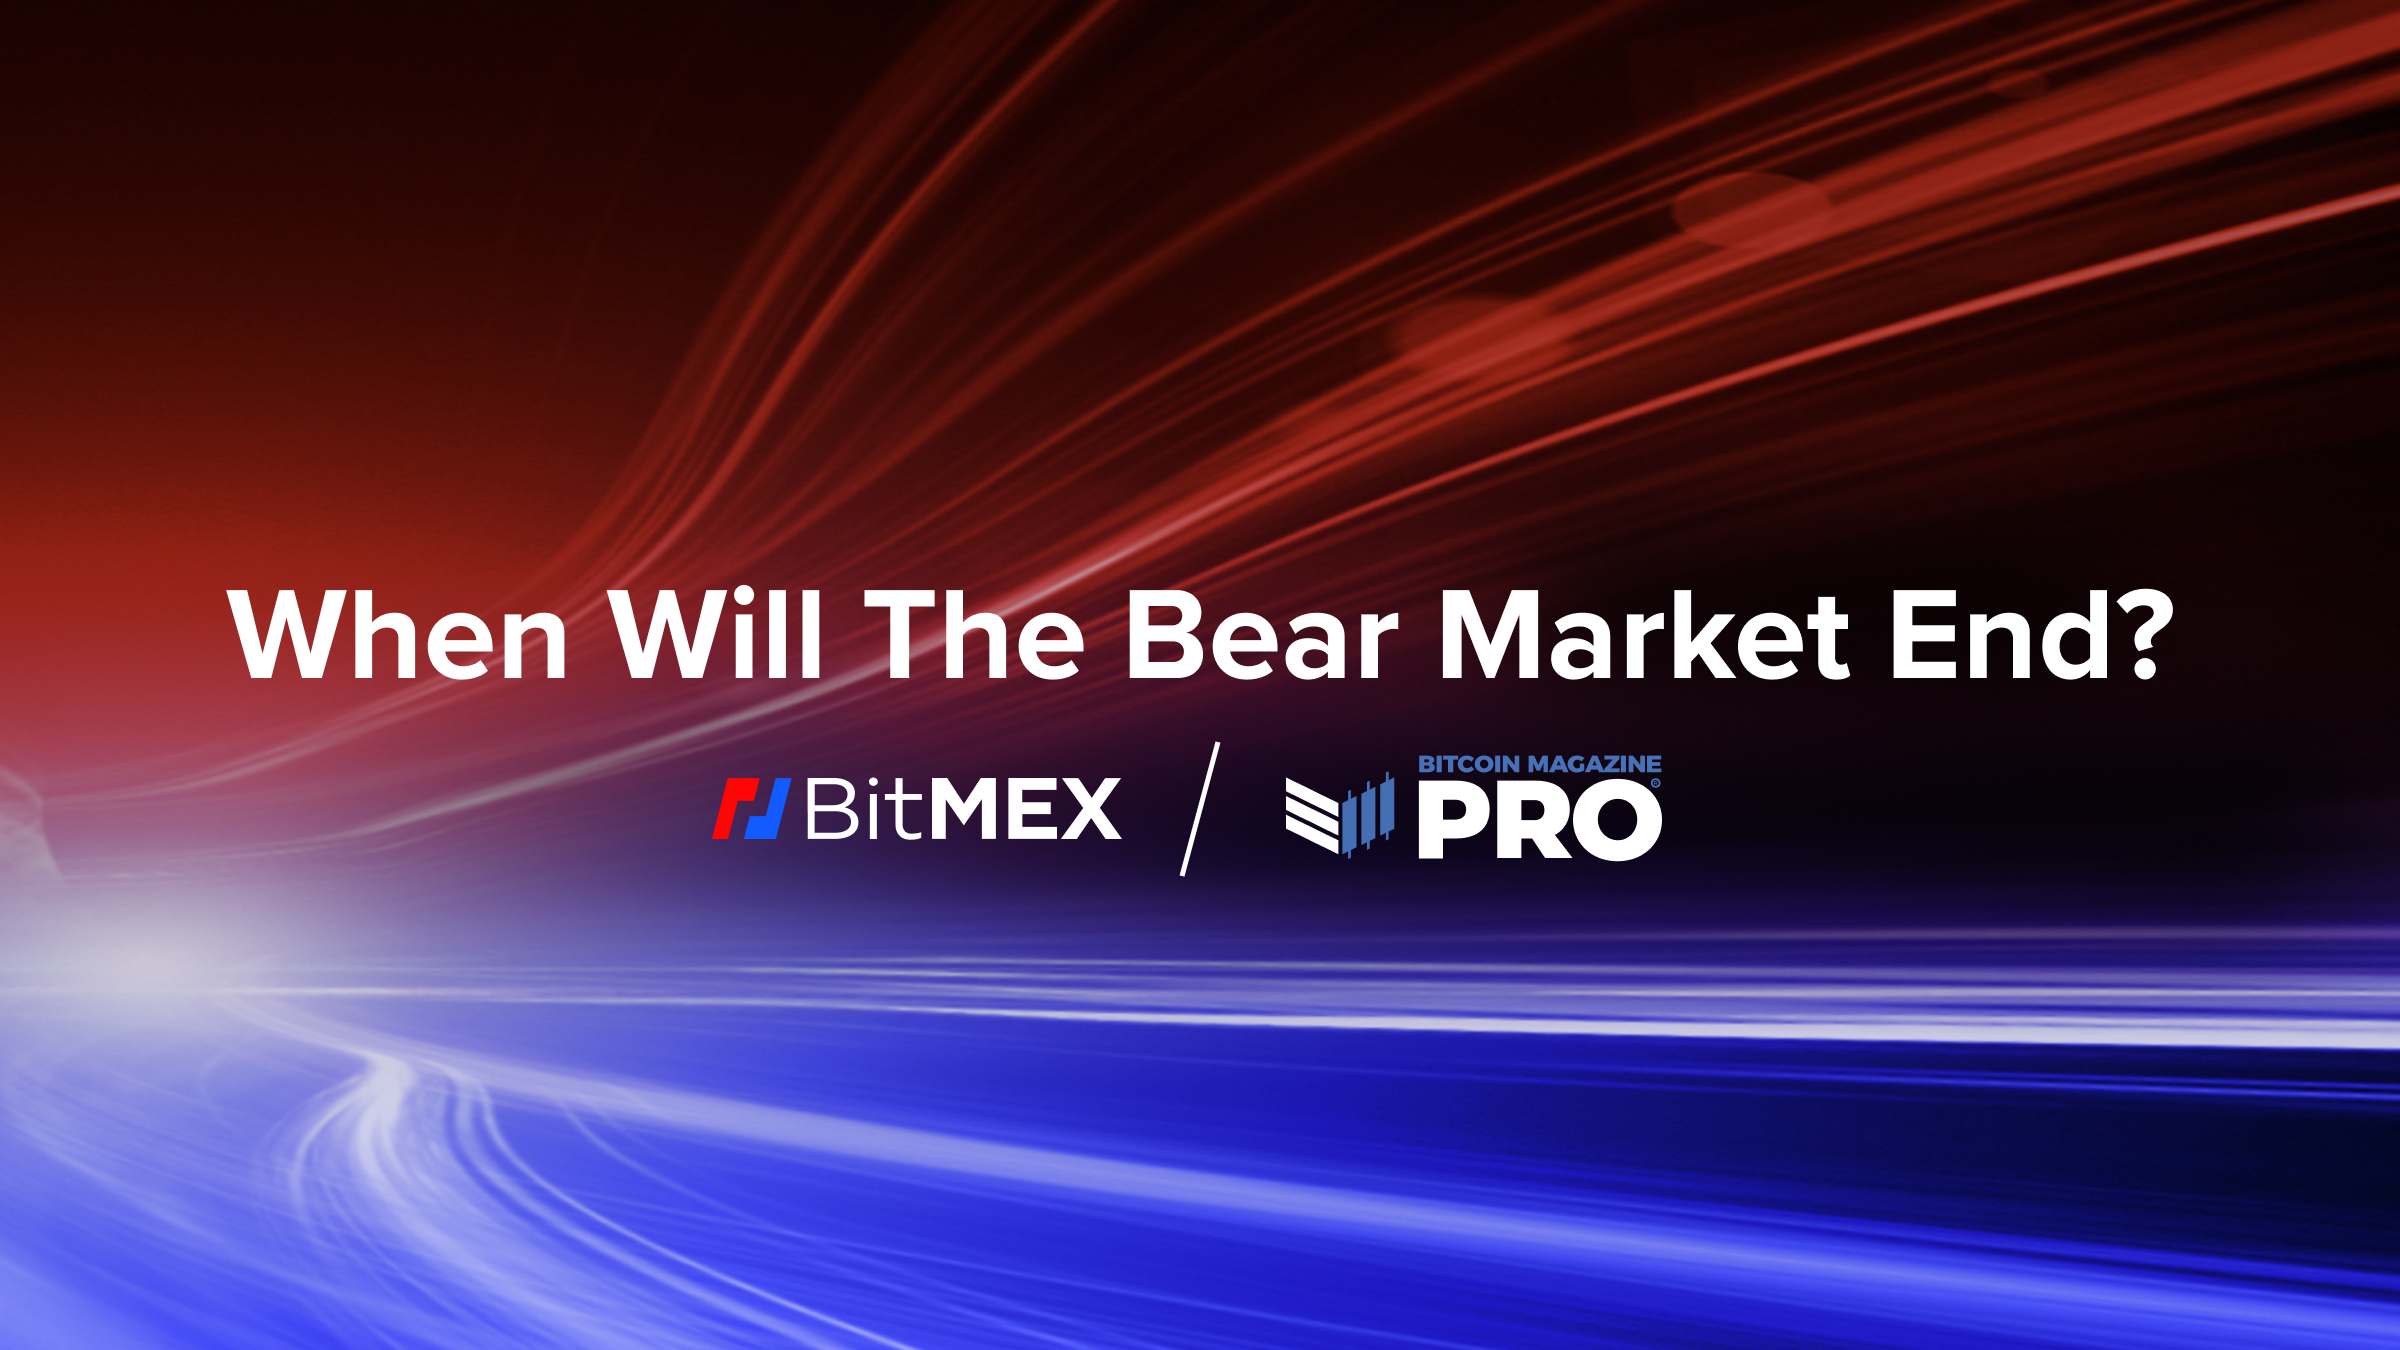 When will the crypto bear market end